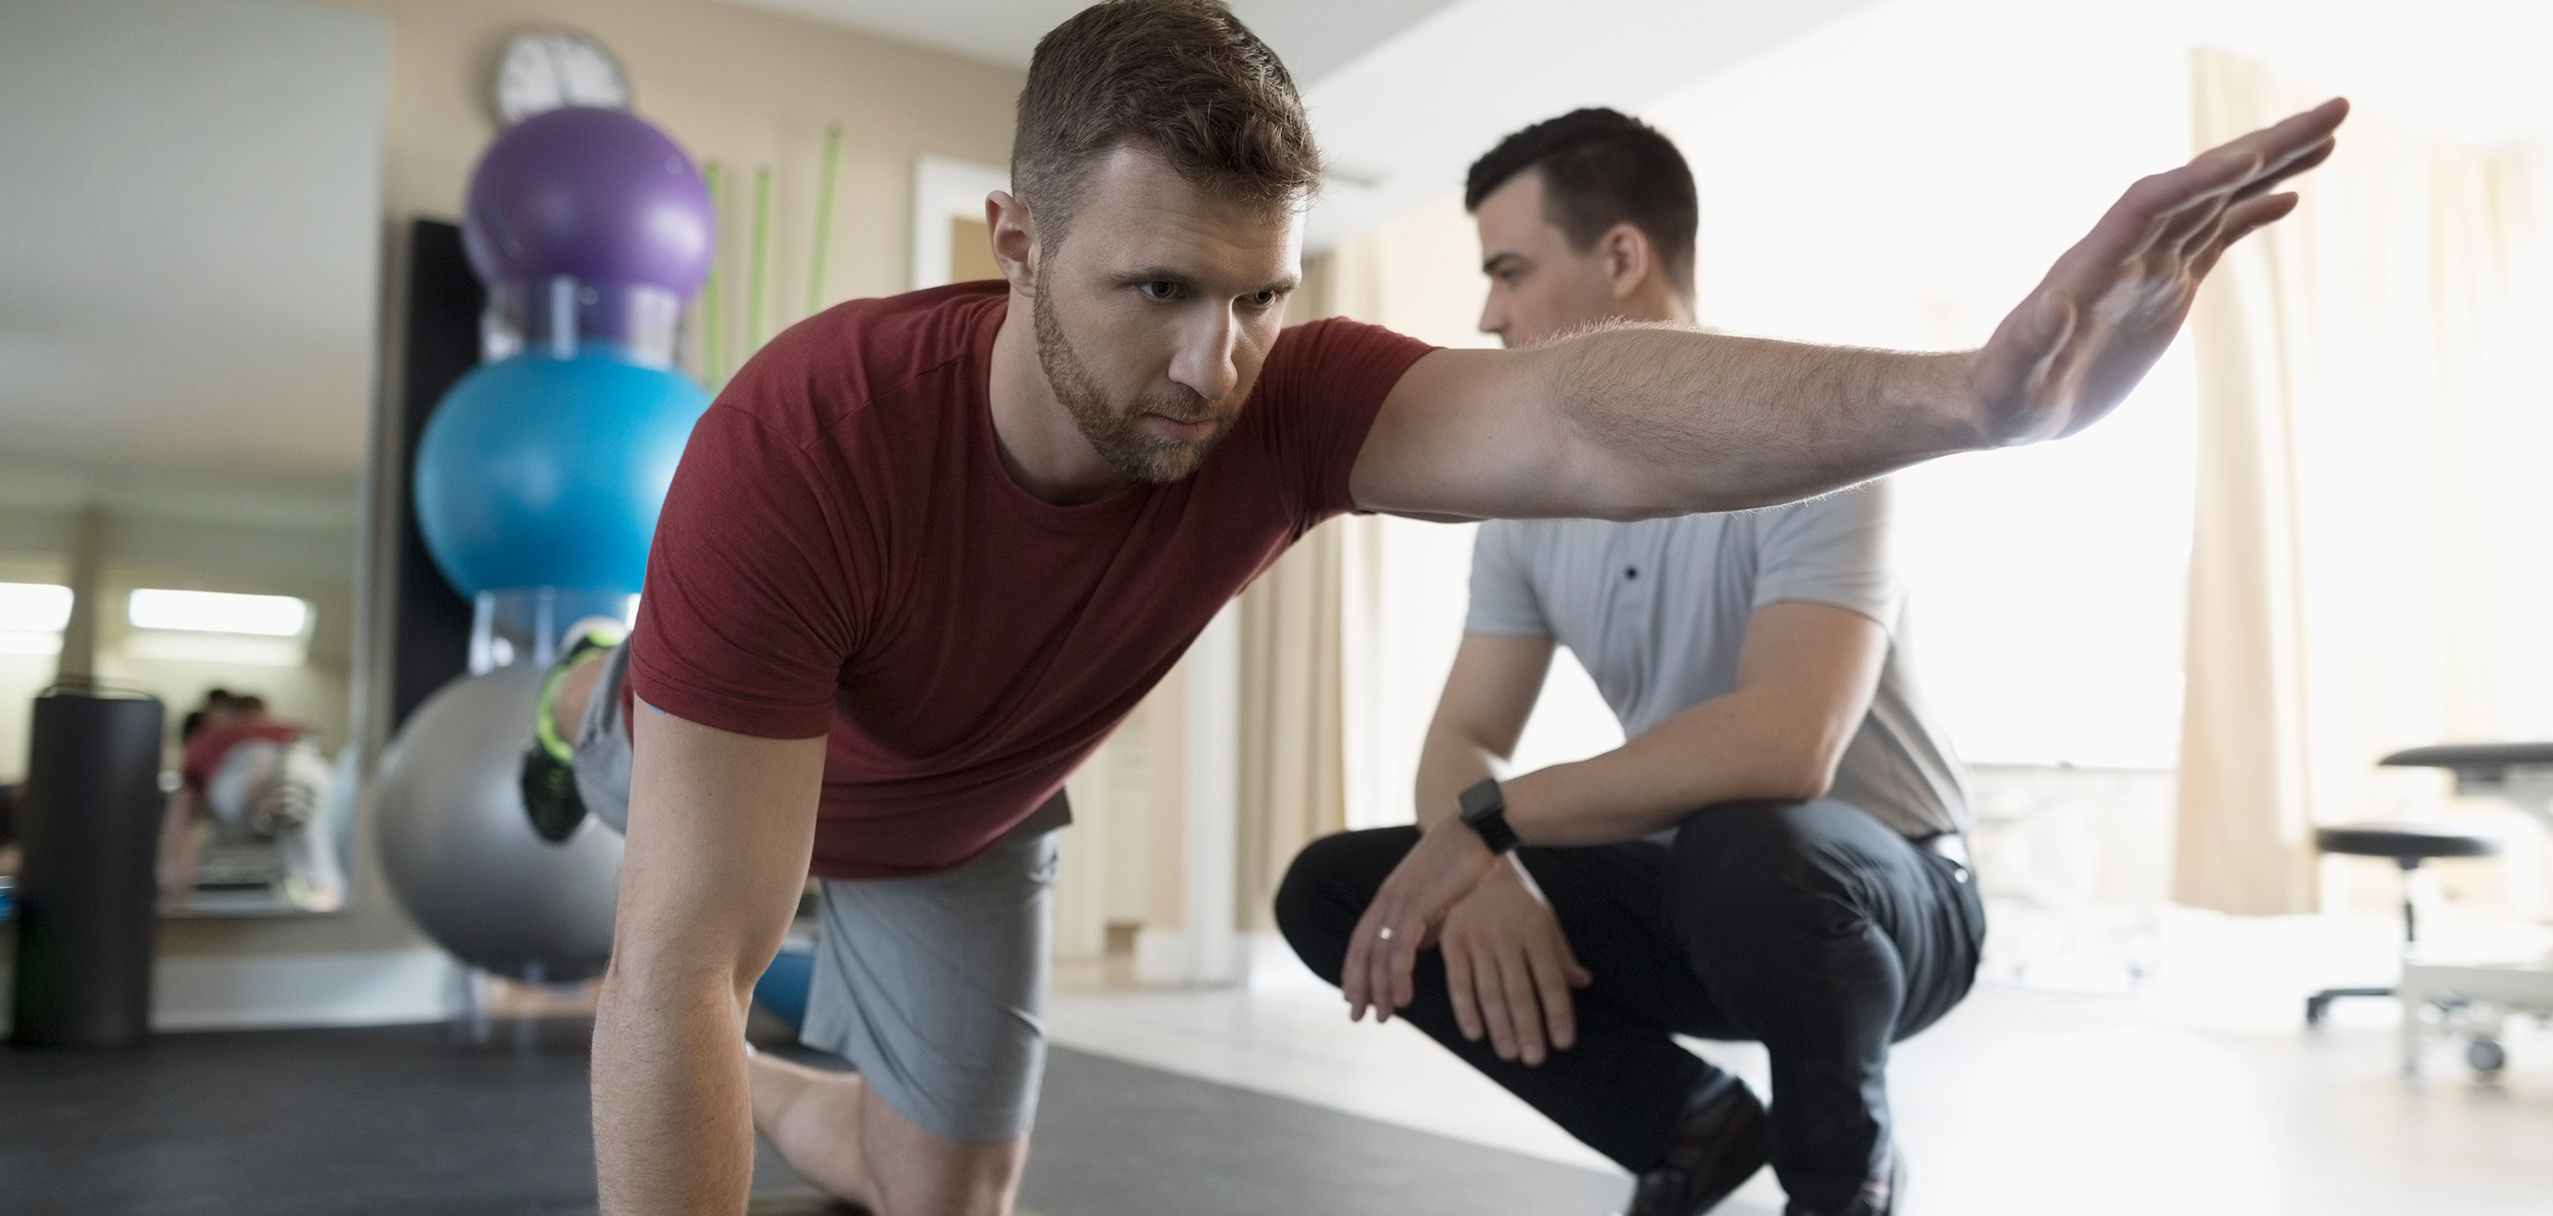 Exercise Prescription for Back Pain: Work with a Personal Trainer -  Generation Fit